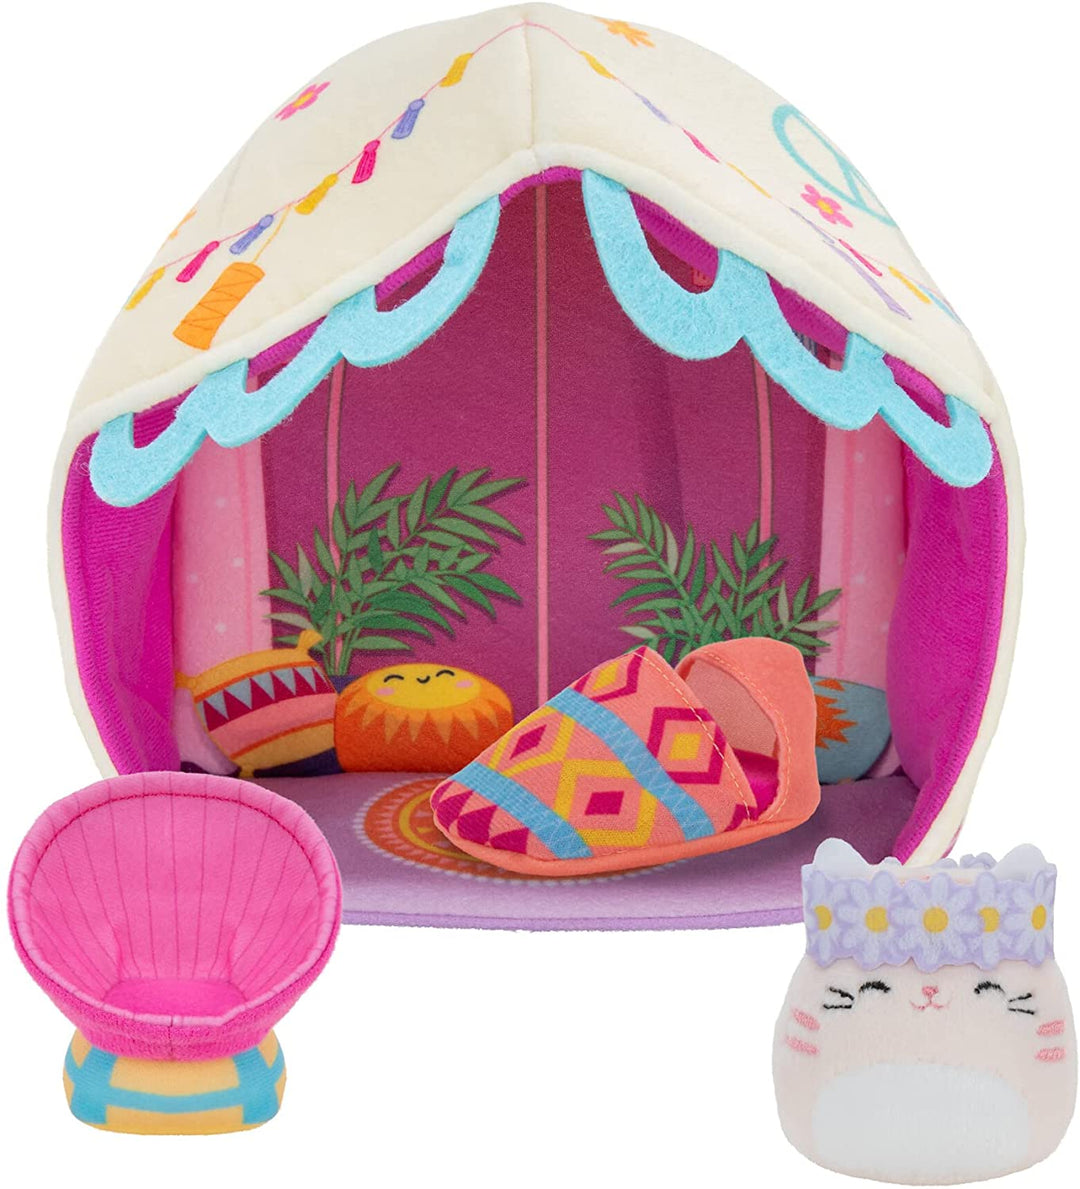 Squishville SQM0210 Deluxe Glamping Includes 2-Inch Paulita The Pink Tabby Cat,